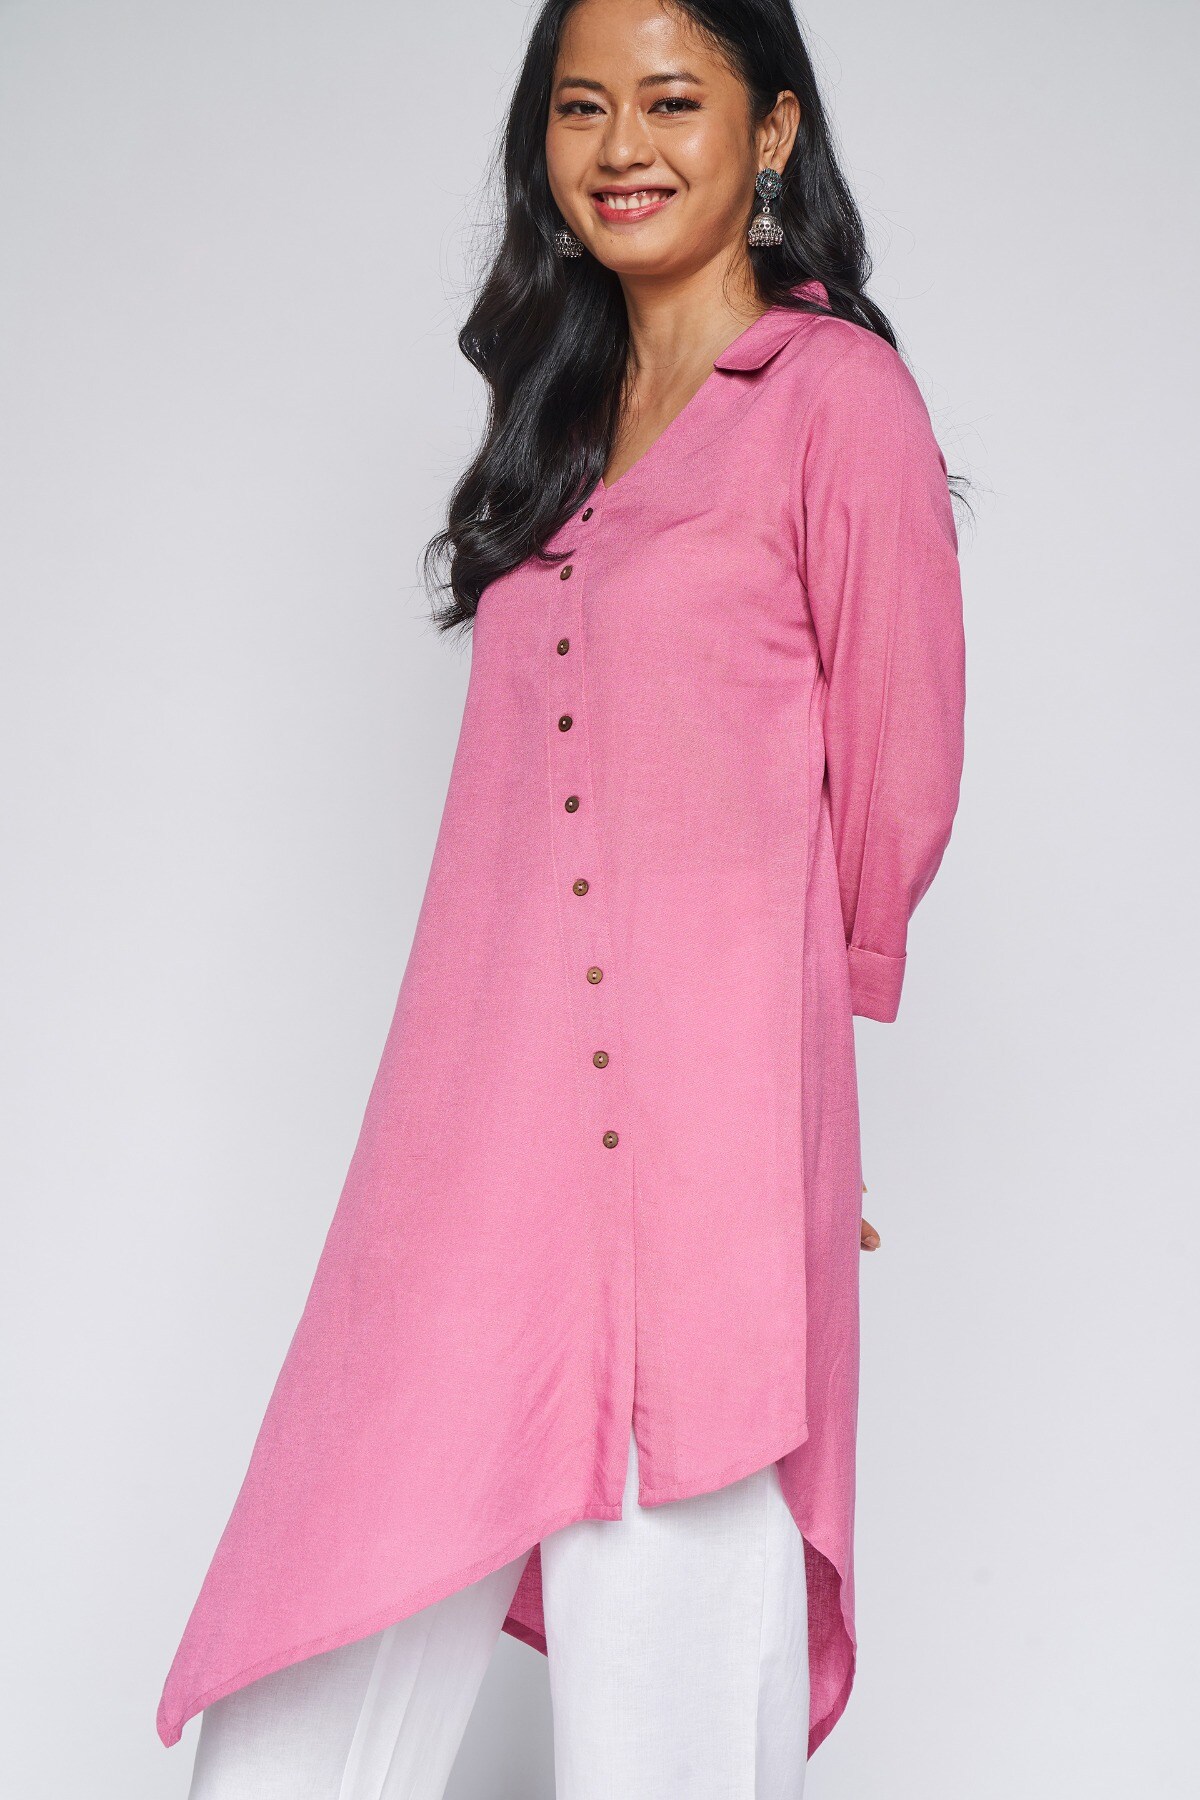 2 - Lilac Solid A-Line Tunic, image 2